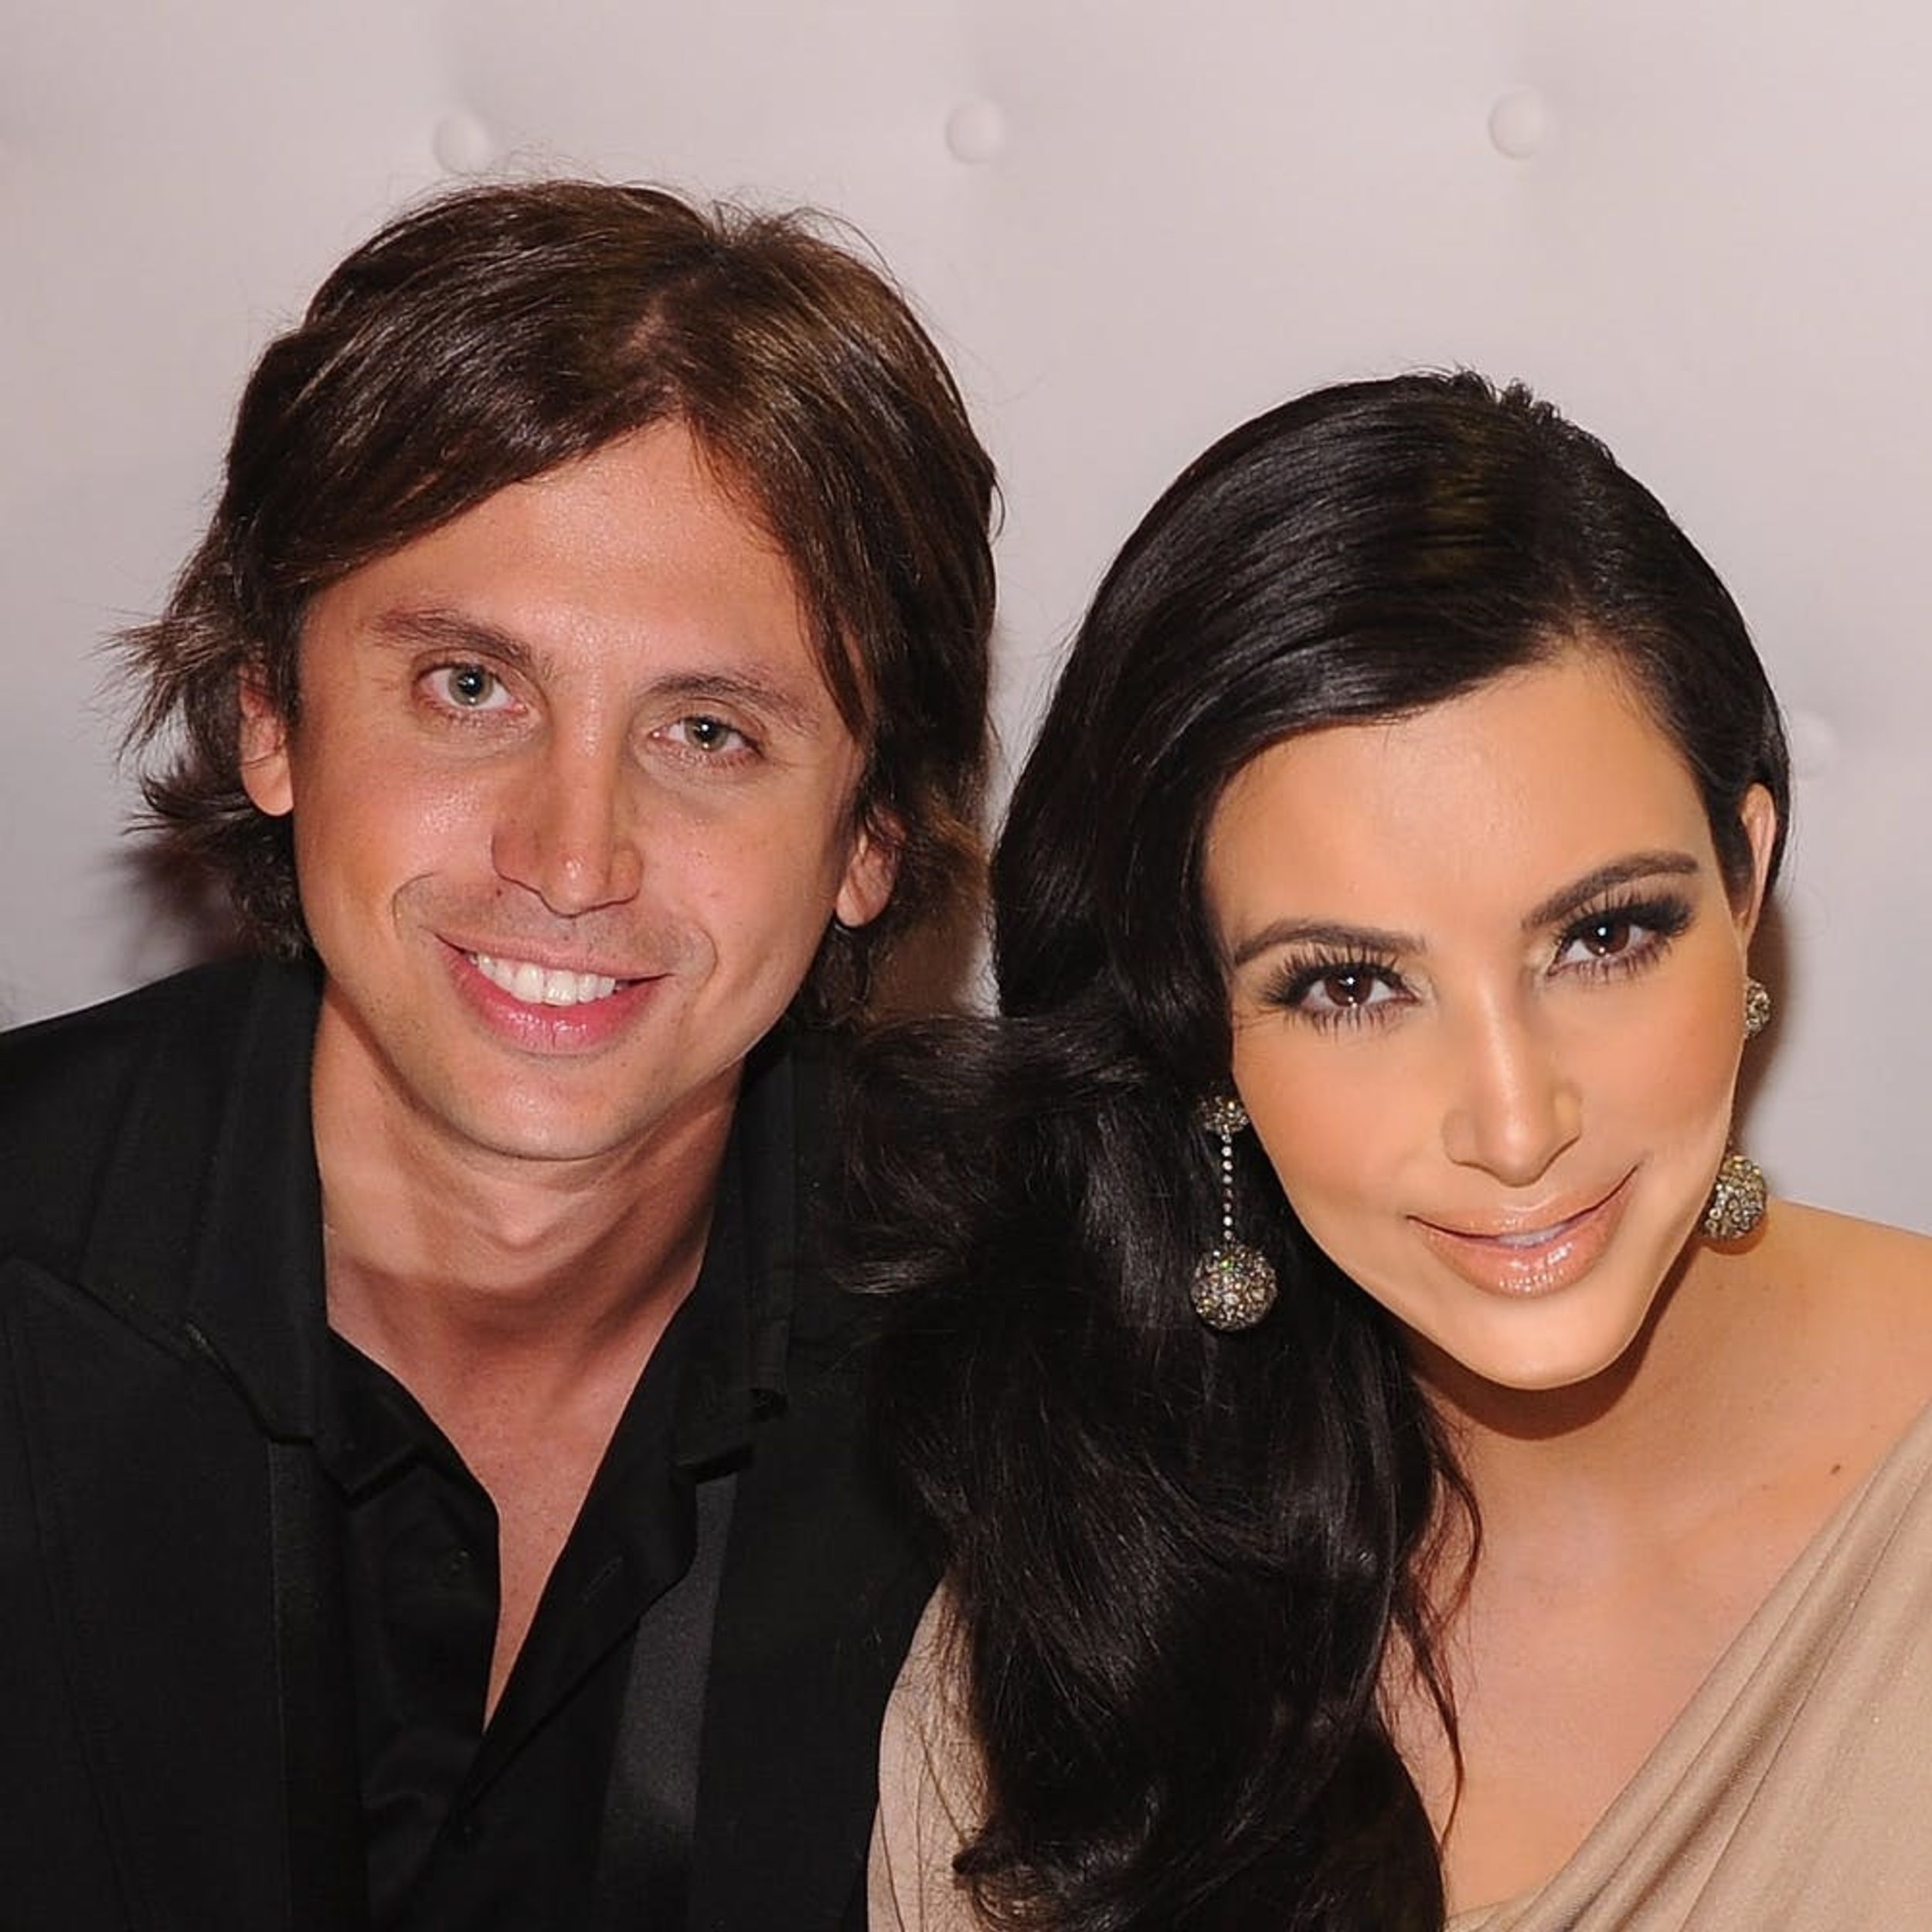 Kim K’s BFF Jonathan Cheban Says the Celeb Is “Not Doing So Good” After the Robbery